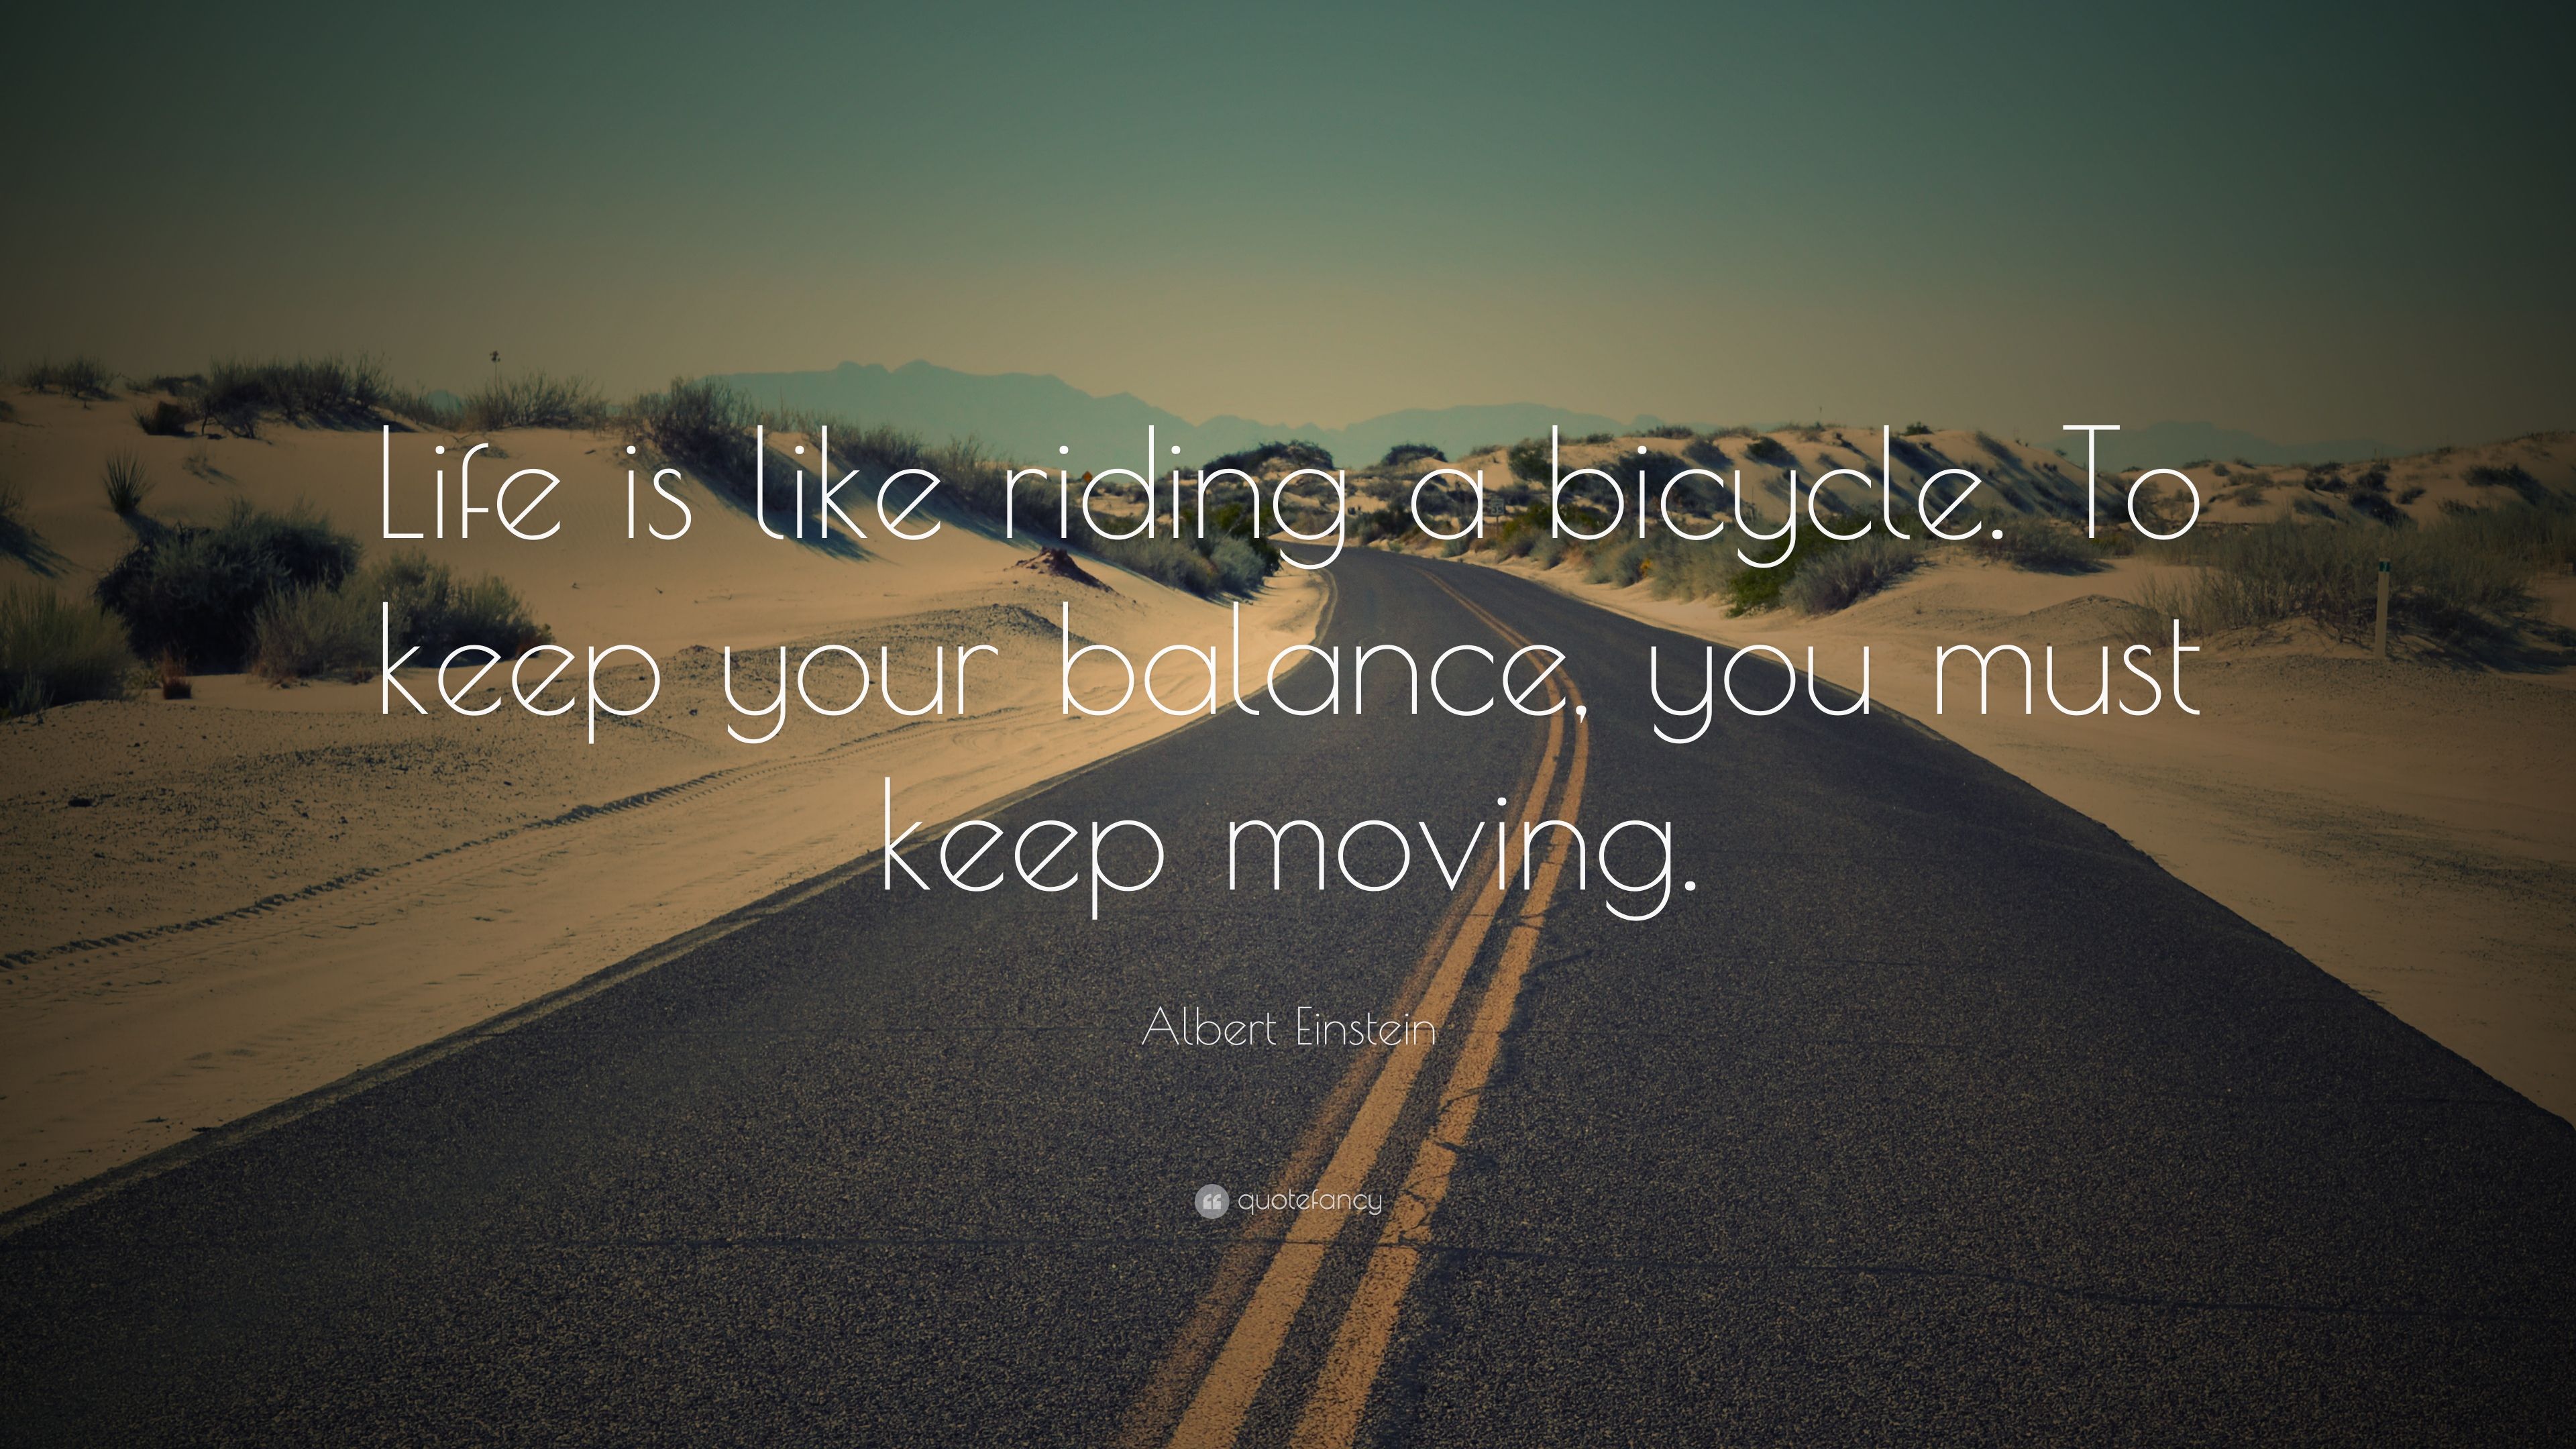 Albert Einstein Quote: “Life is like riding a bicycle. To keep your balance, you must keep moving.” (26 wallpaper)